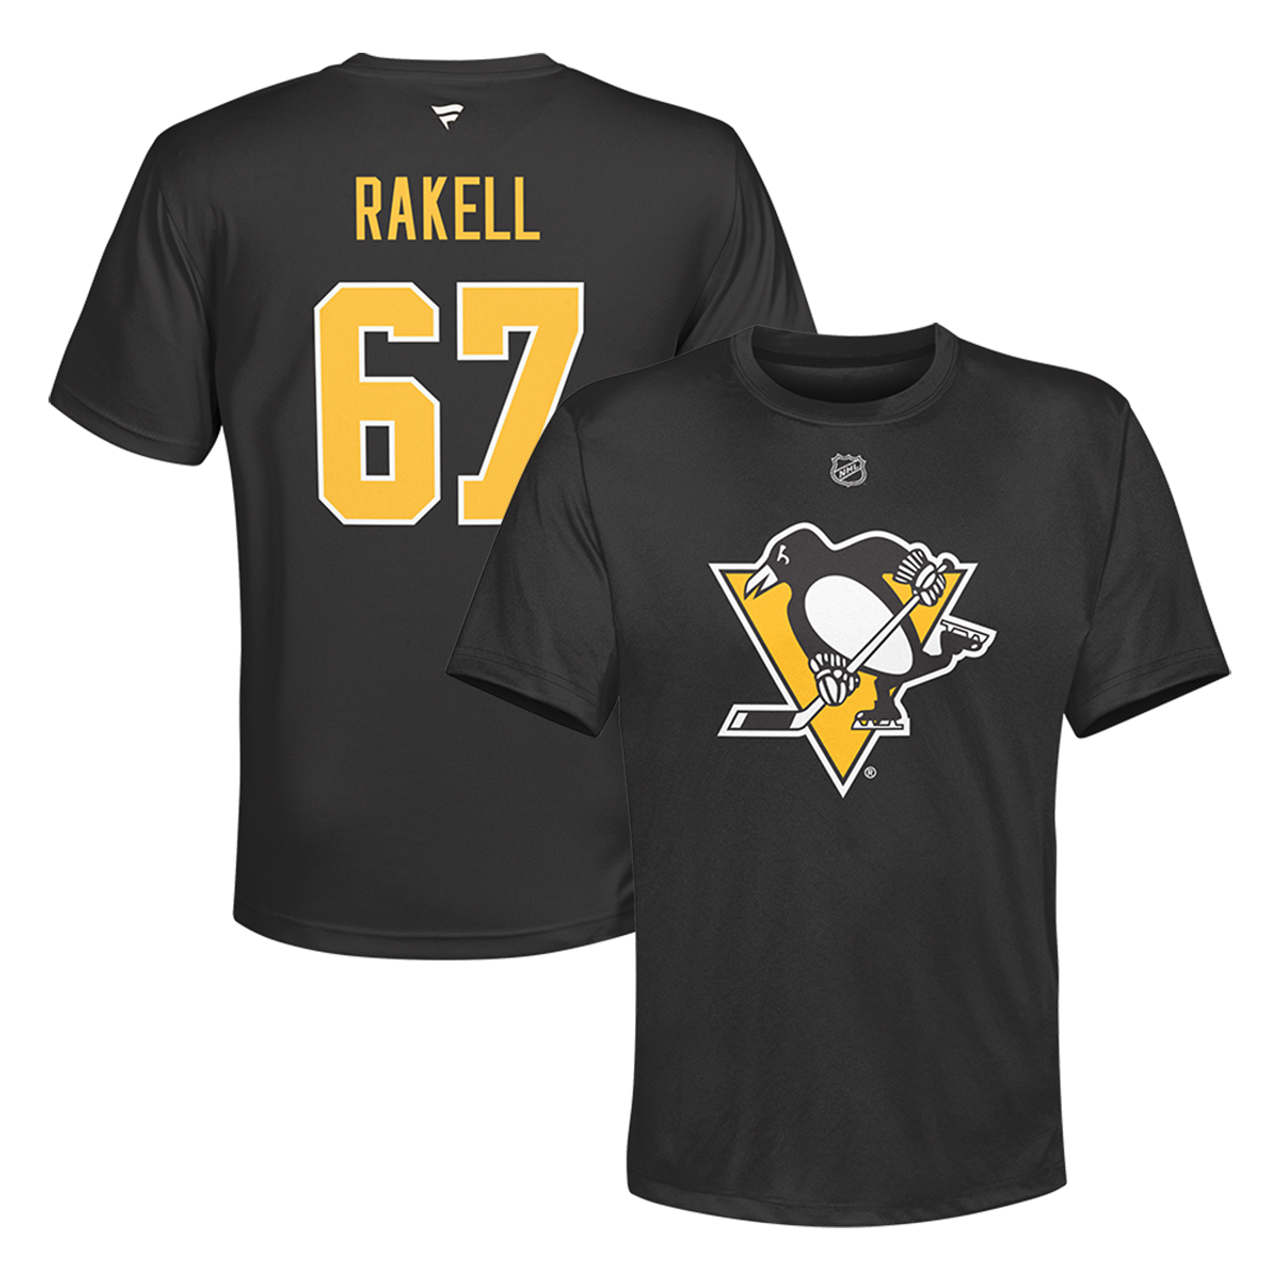 Pittsburgh Penguins on X: .@PensGear is goin' gold!